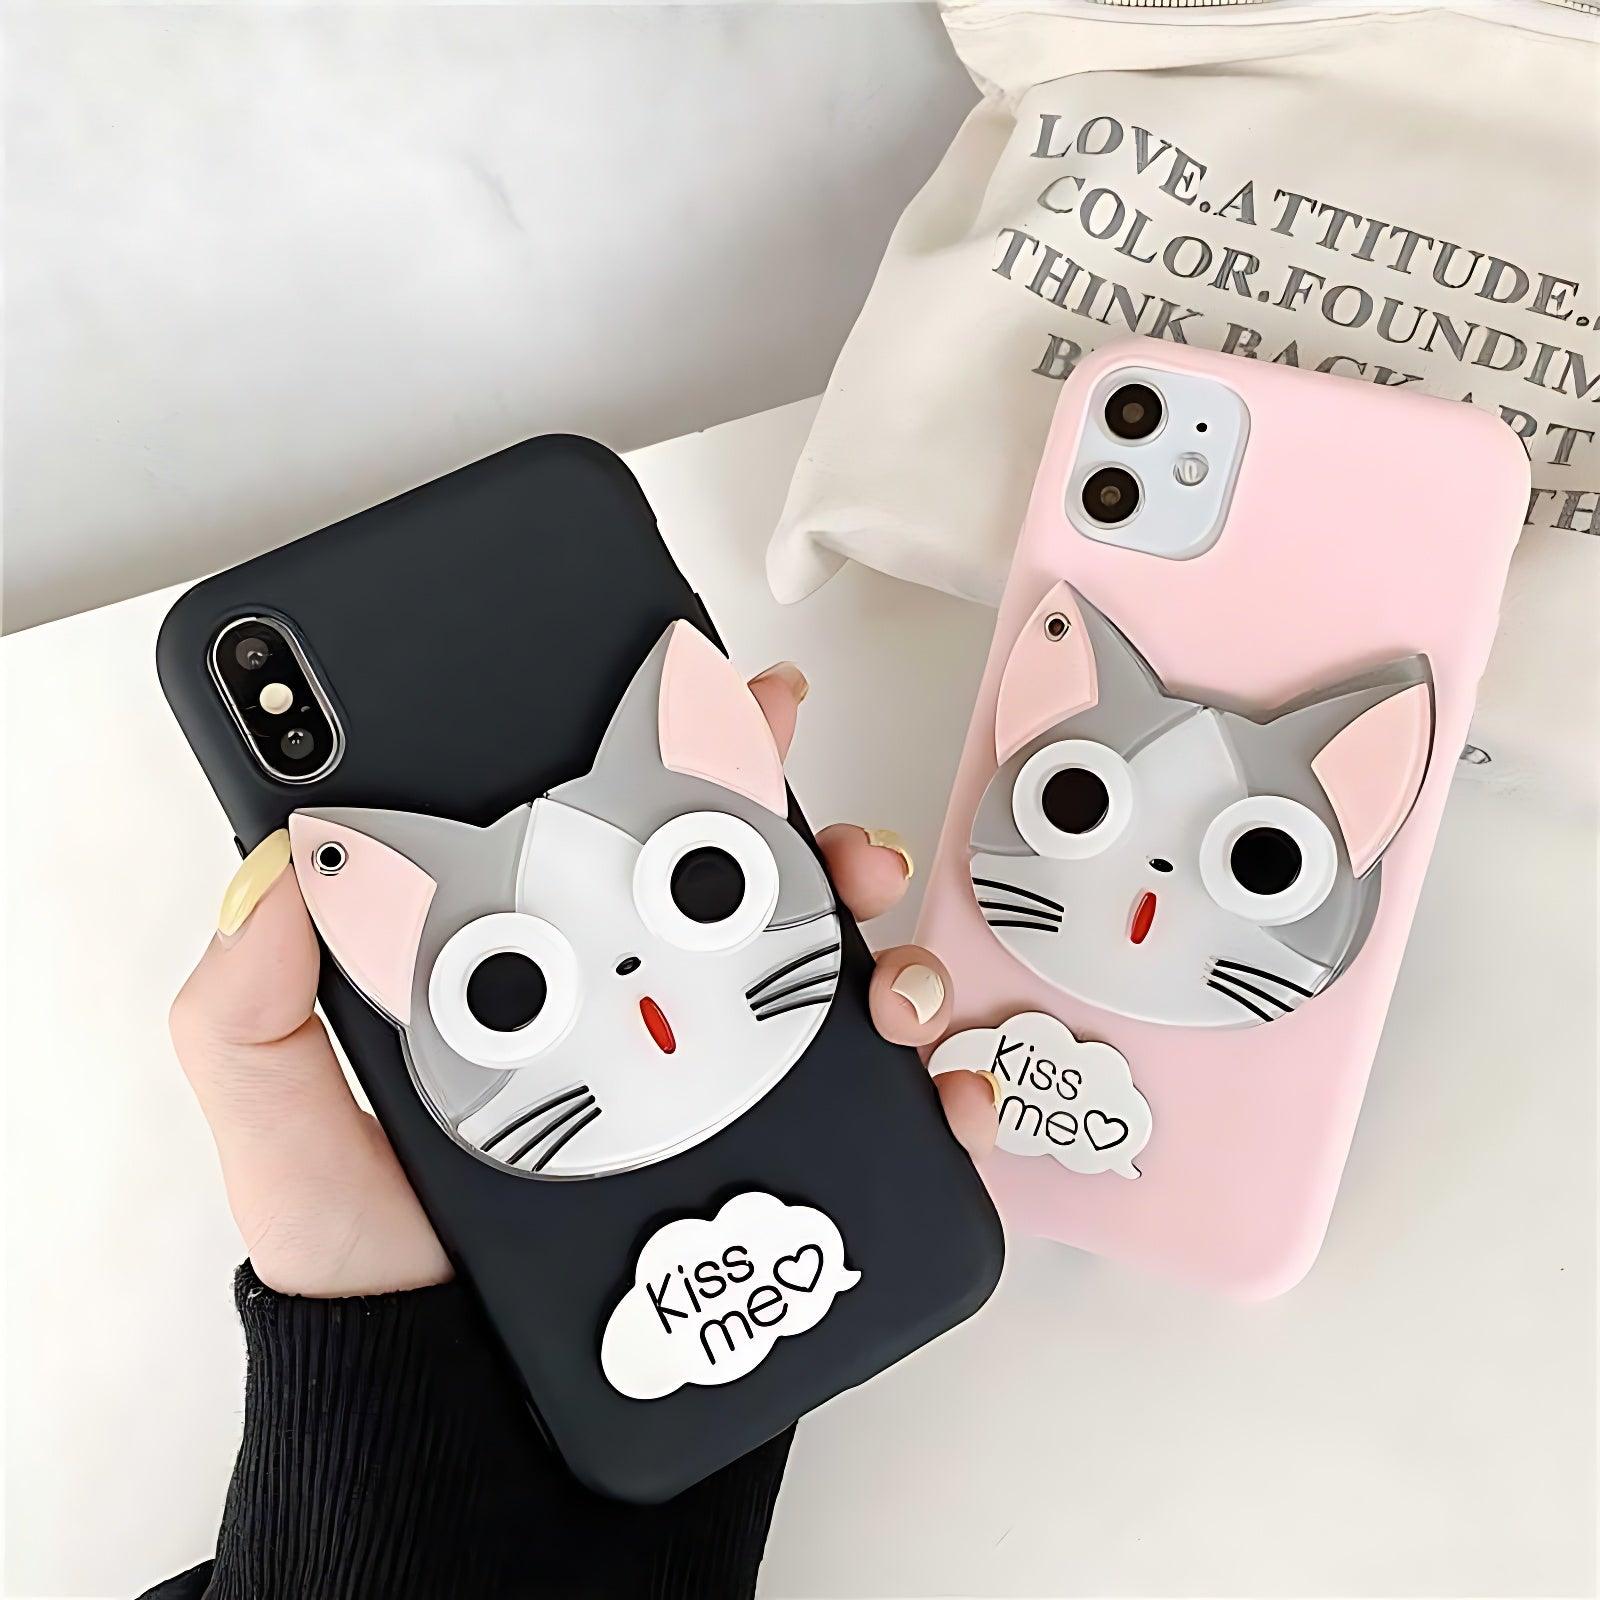 Galaxy J5 2017 J530 Phone Cases - Touchy Style .